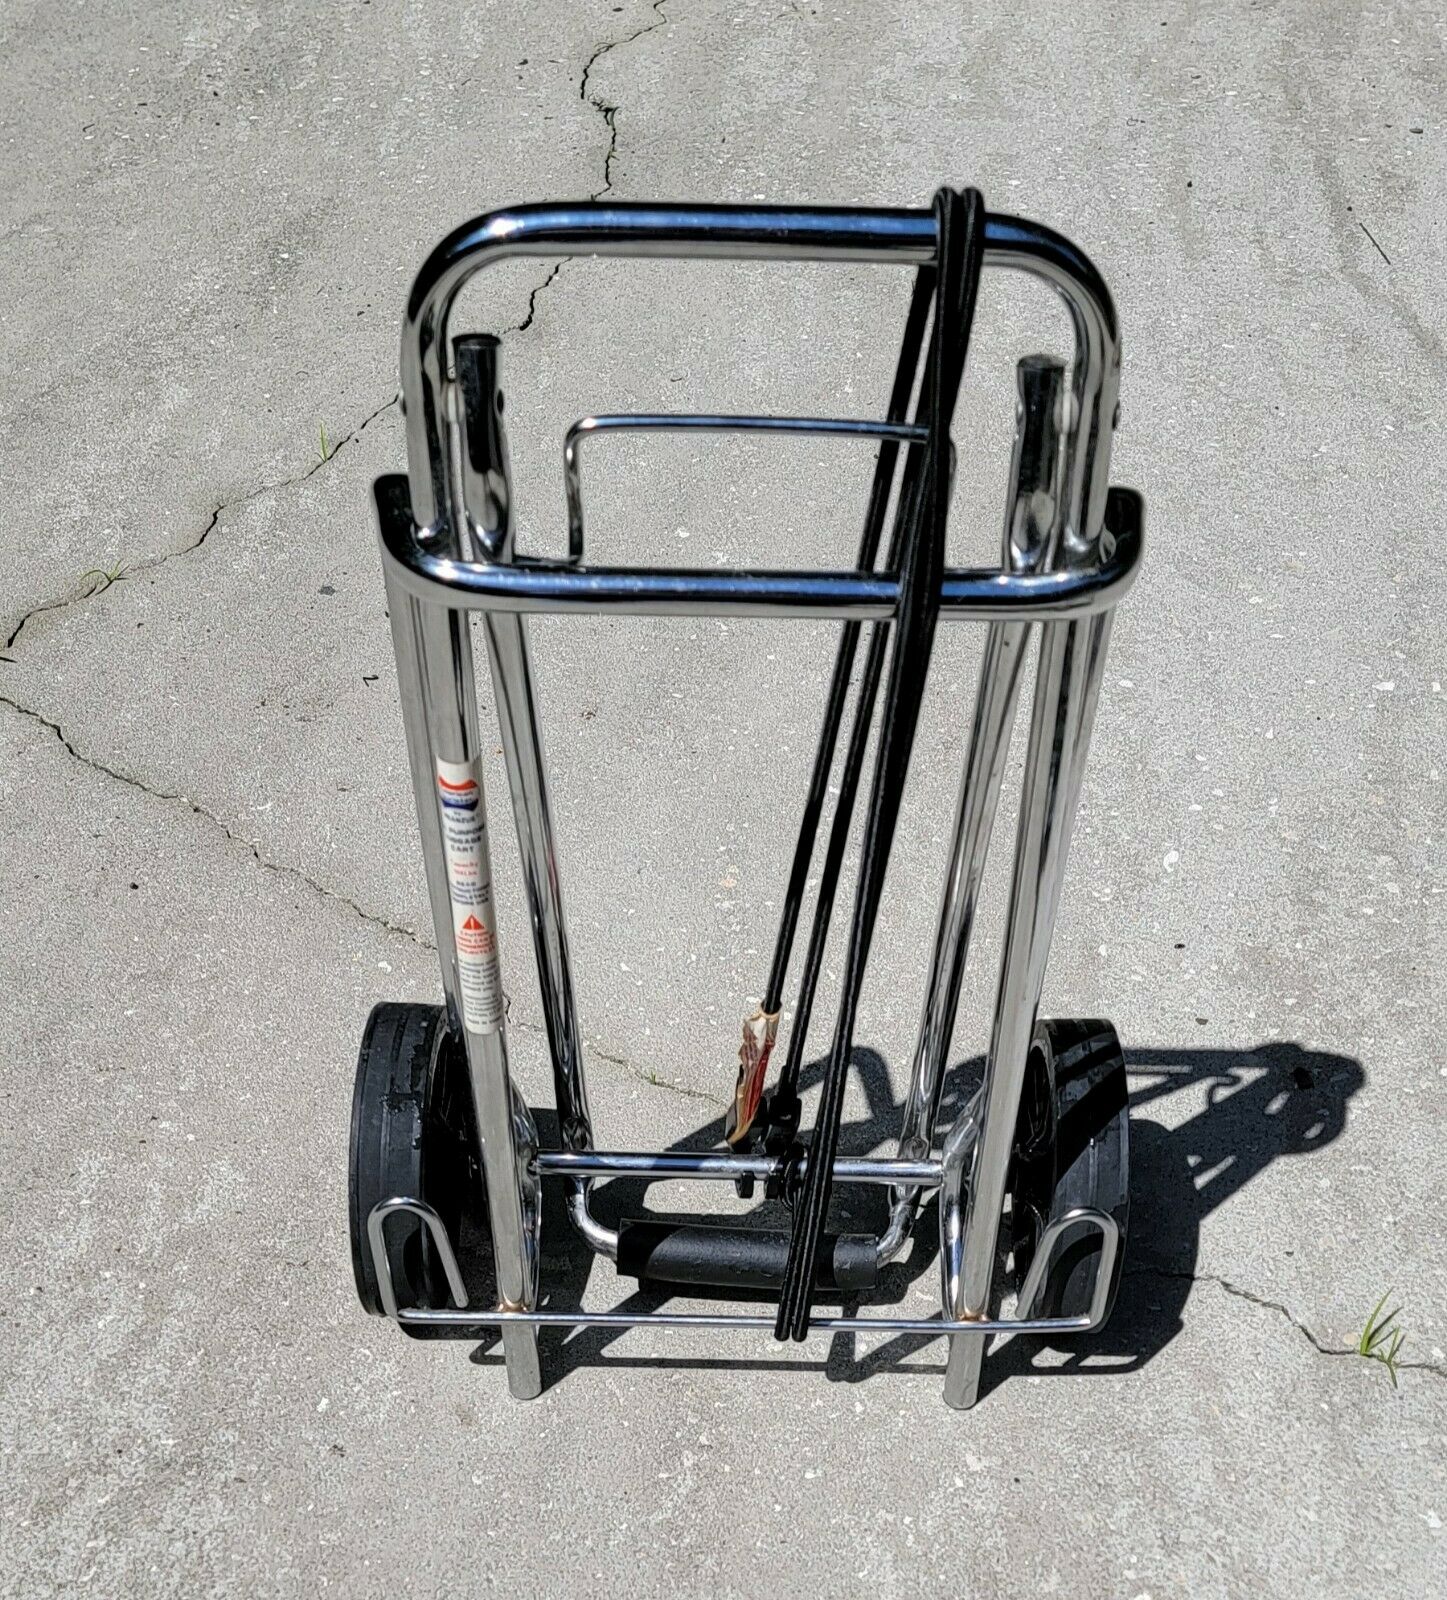 New American Tourister All Purpose Luggage Cart For 100 Lbs With Bungee Straps